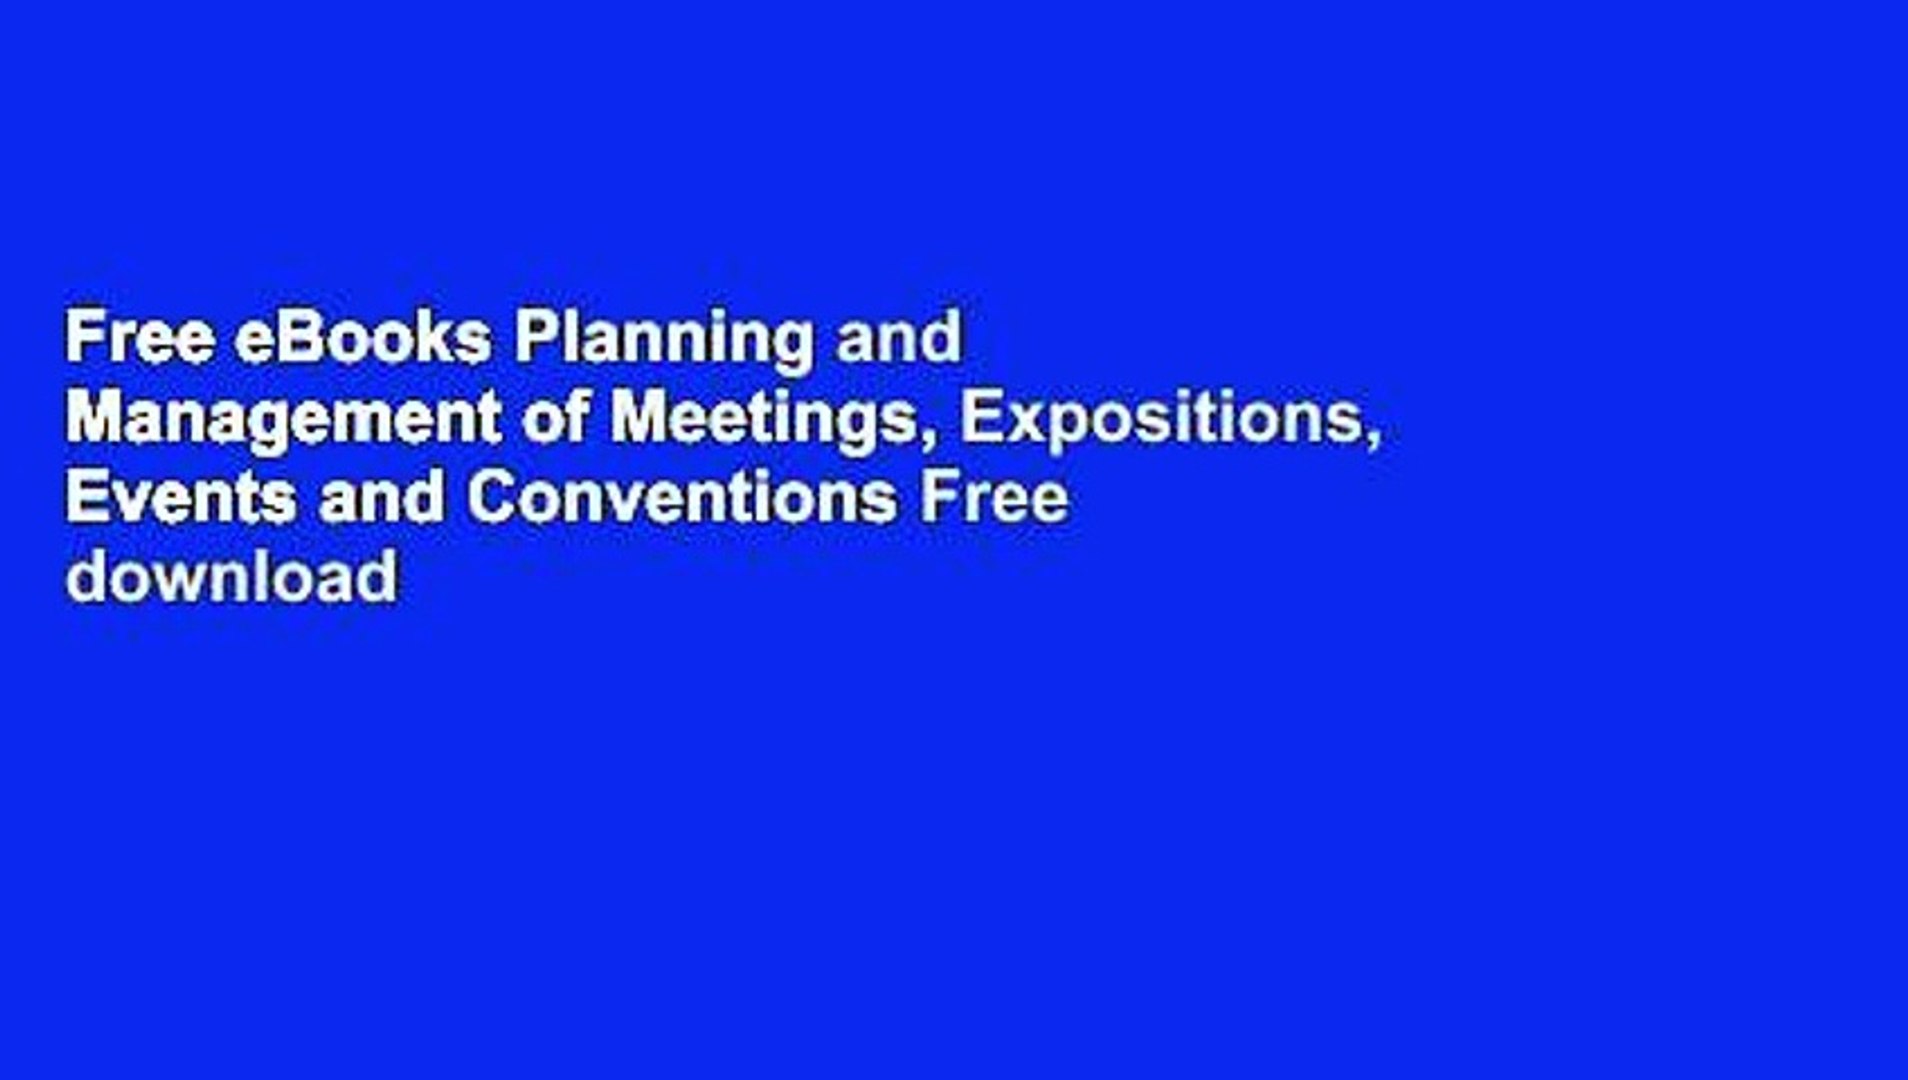 Free eBooks Planning and Management of Meetings, Expositions, Events and